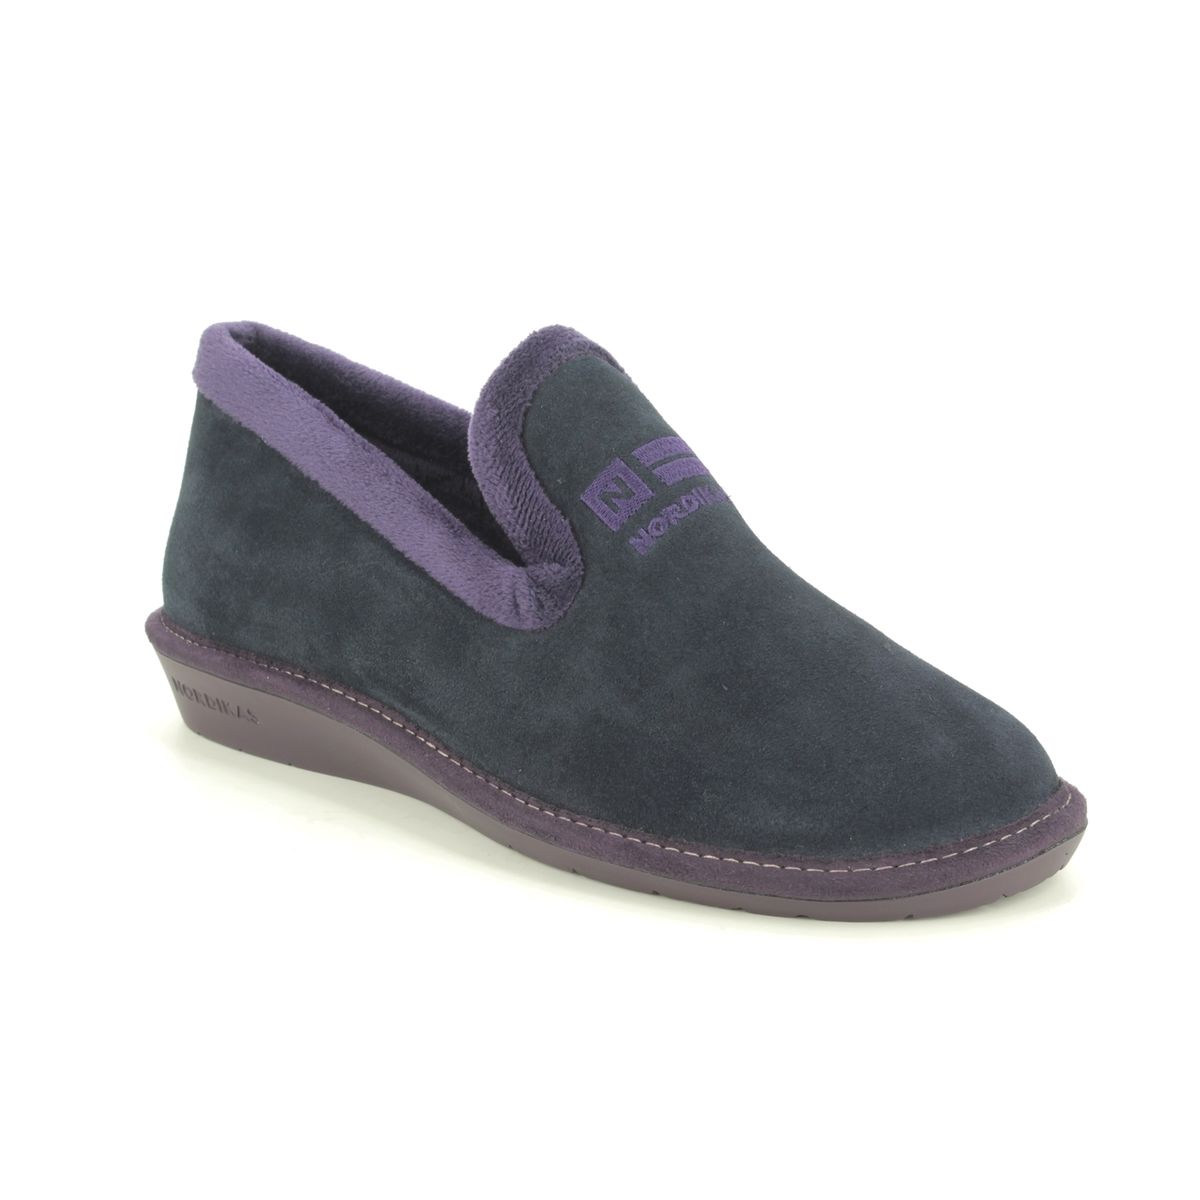 Nordikas Tabackin Navy Suede Womens Slippers 305-4   Nicola 3 In Size 41 In Plain Navy Suede